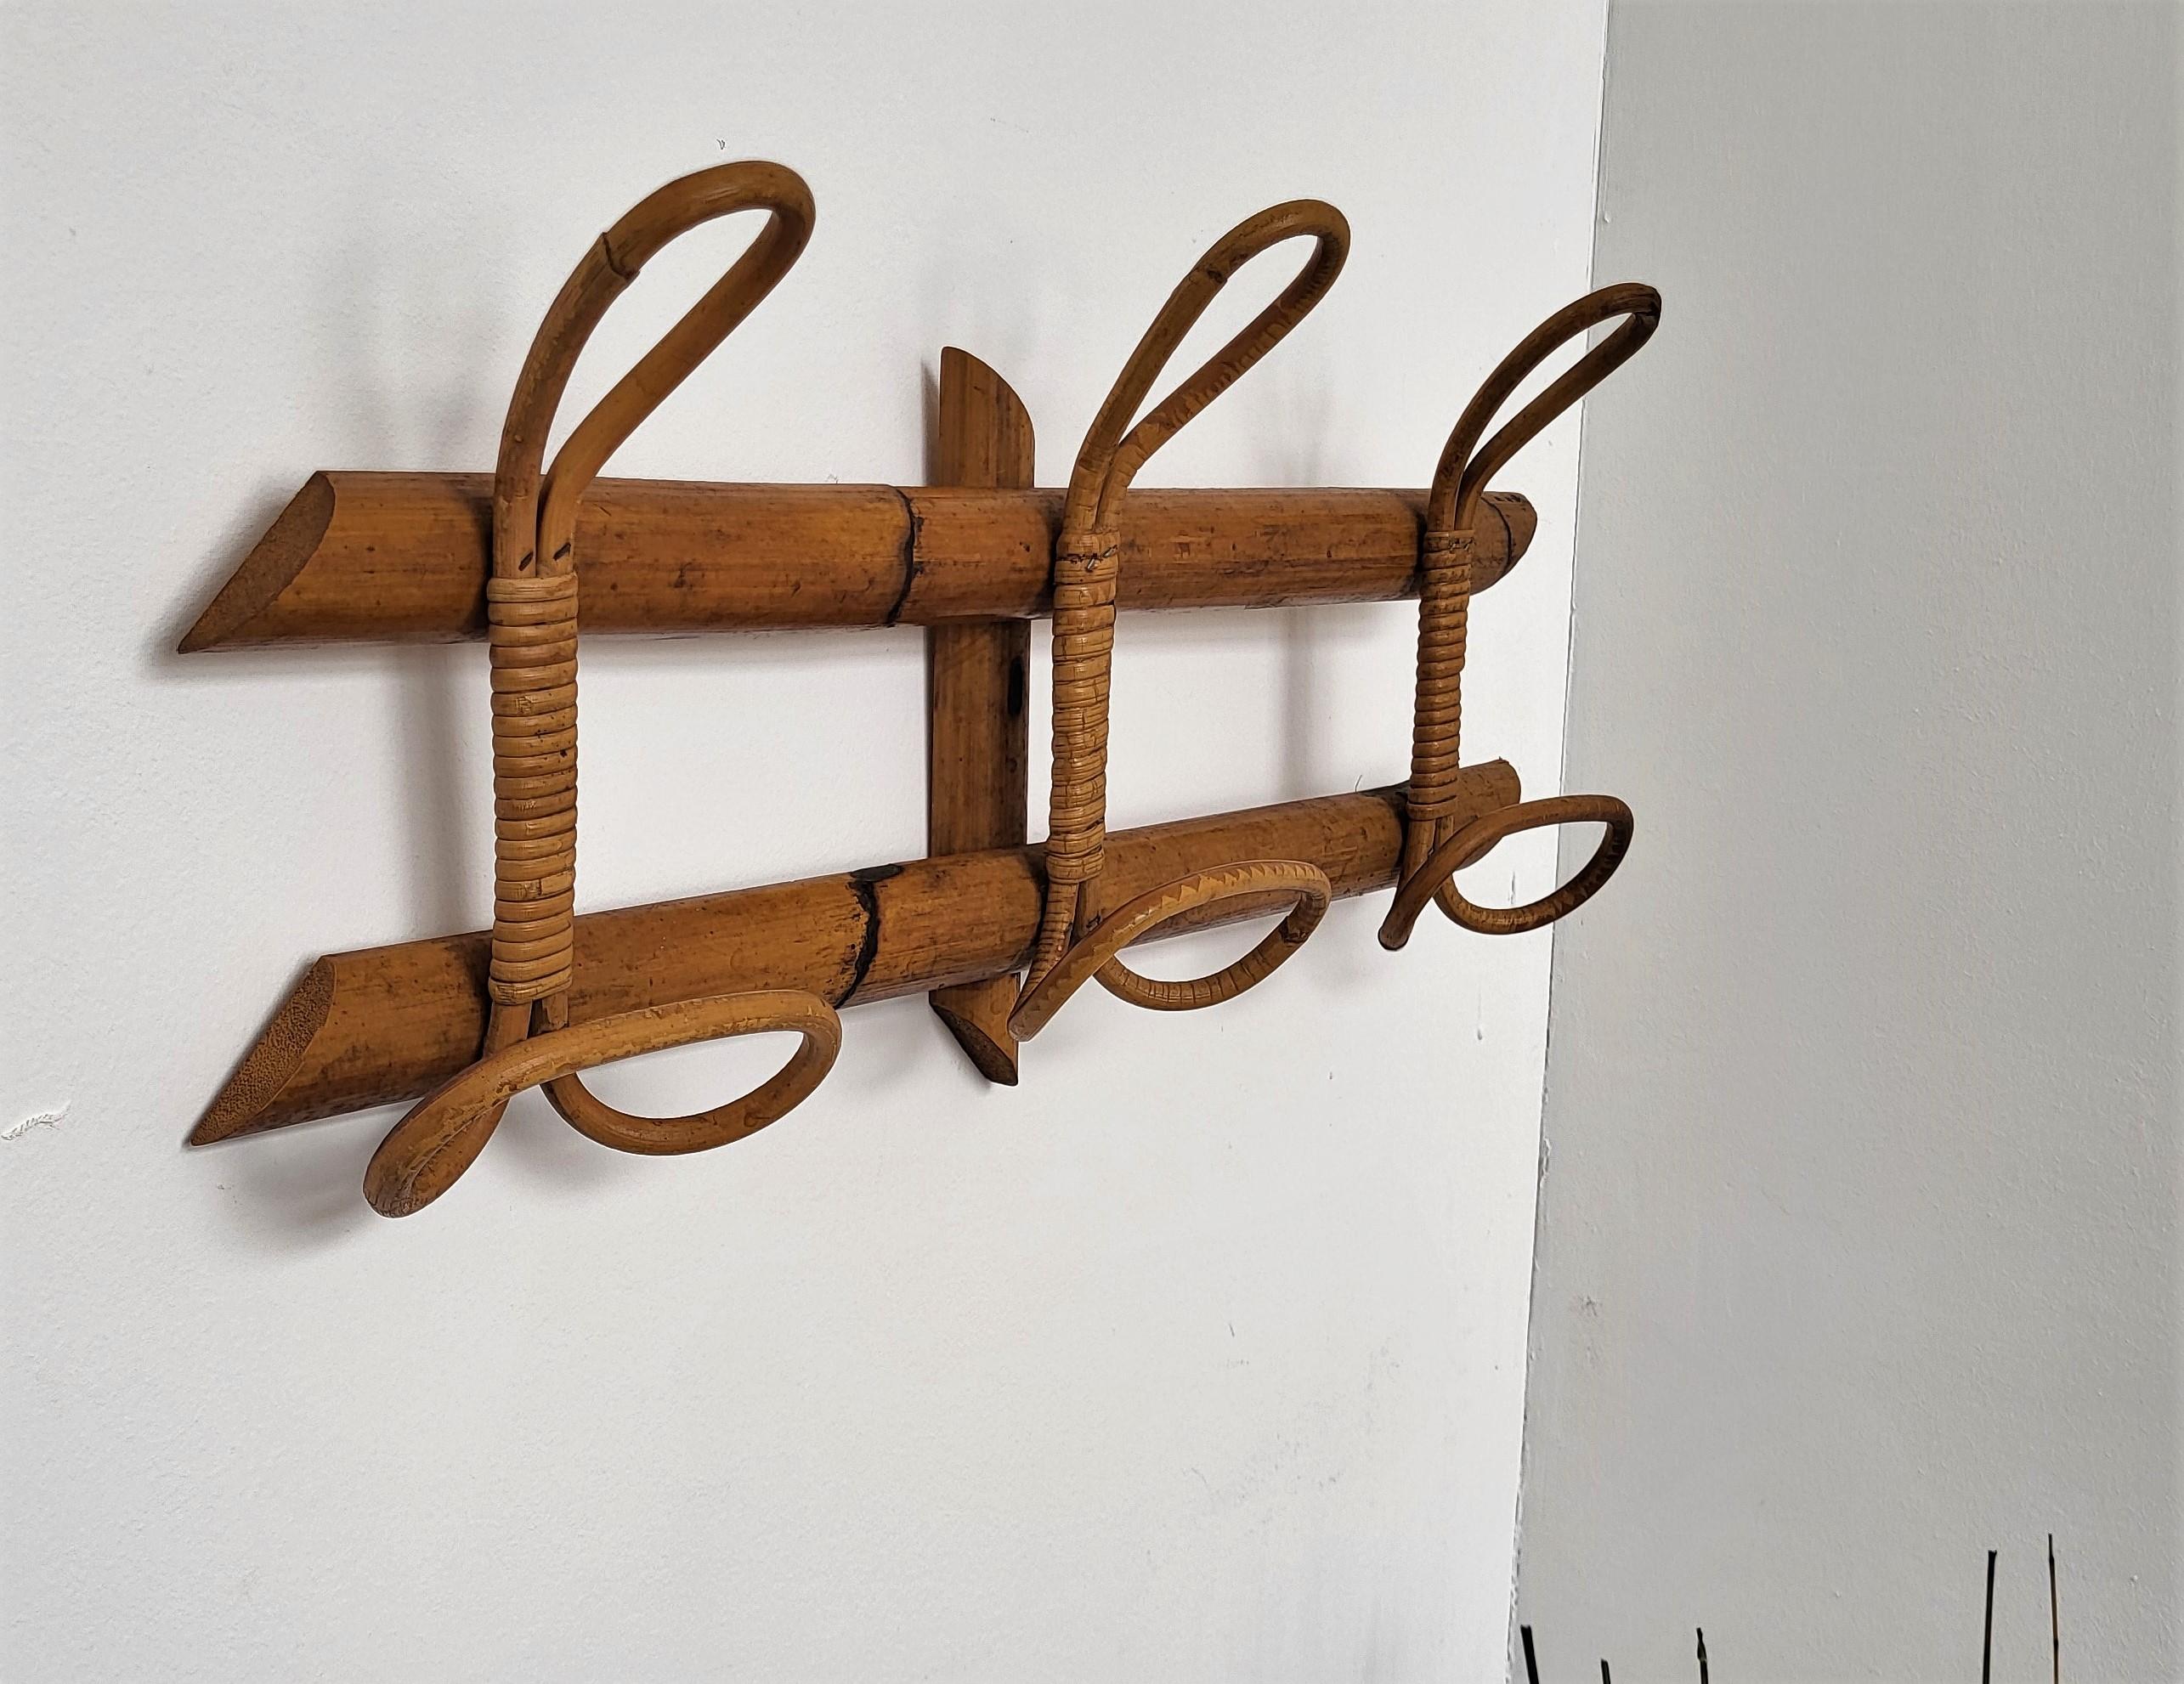 Beautiful 1960s Italian Mid-Century Modern coat hanger rack perfect in any entrance hallway or room for coats and bags as well as in a bedroom or bathroom for bathrobes and towels. This charming piece is in the typical style of Audoux and Minet